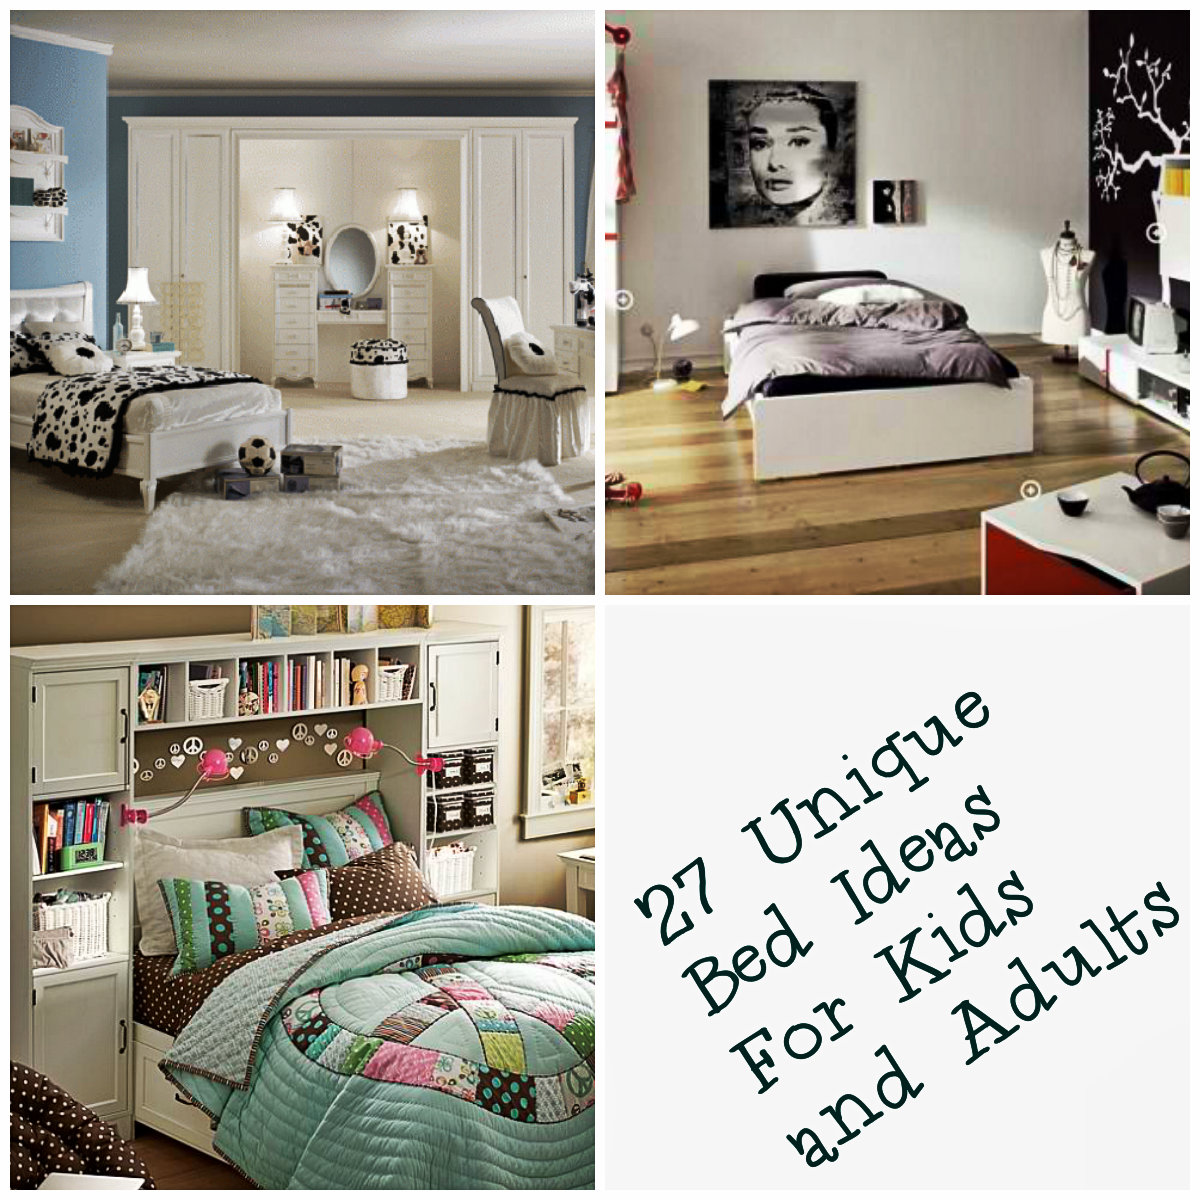 27 Unique Bed Ideas For Kids and Adults